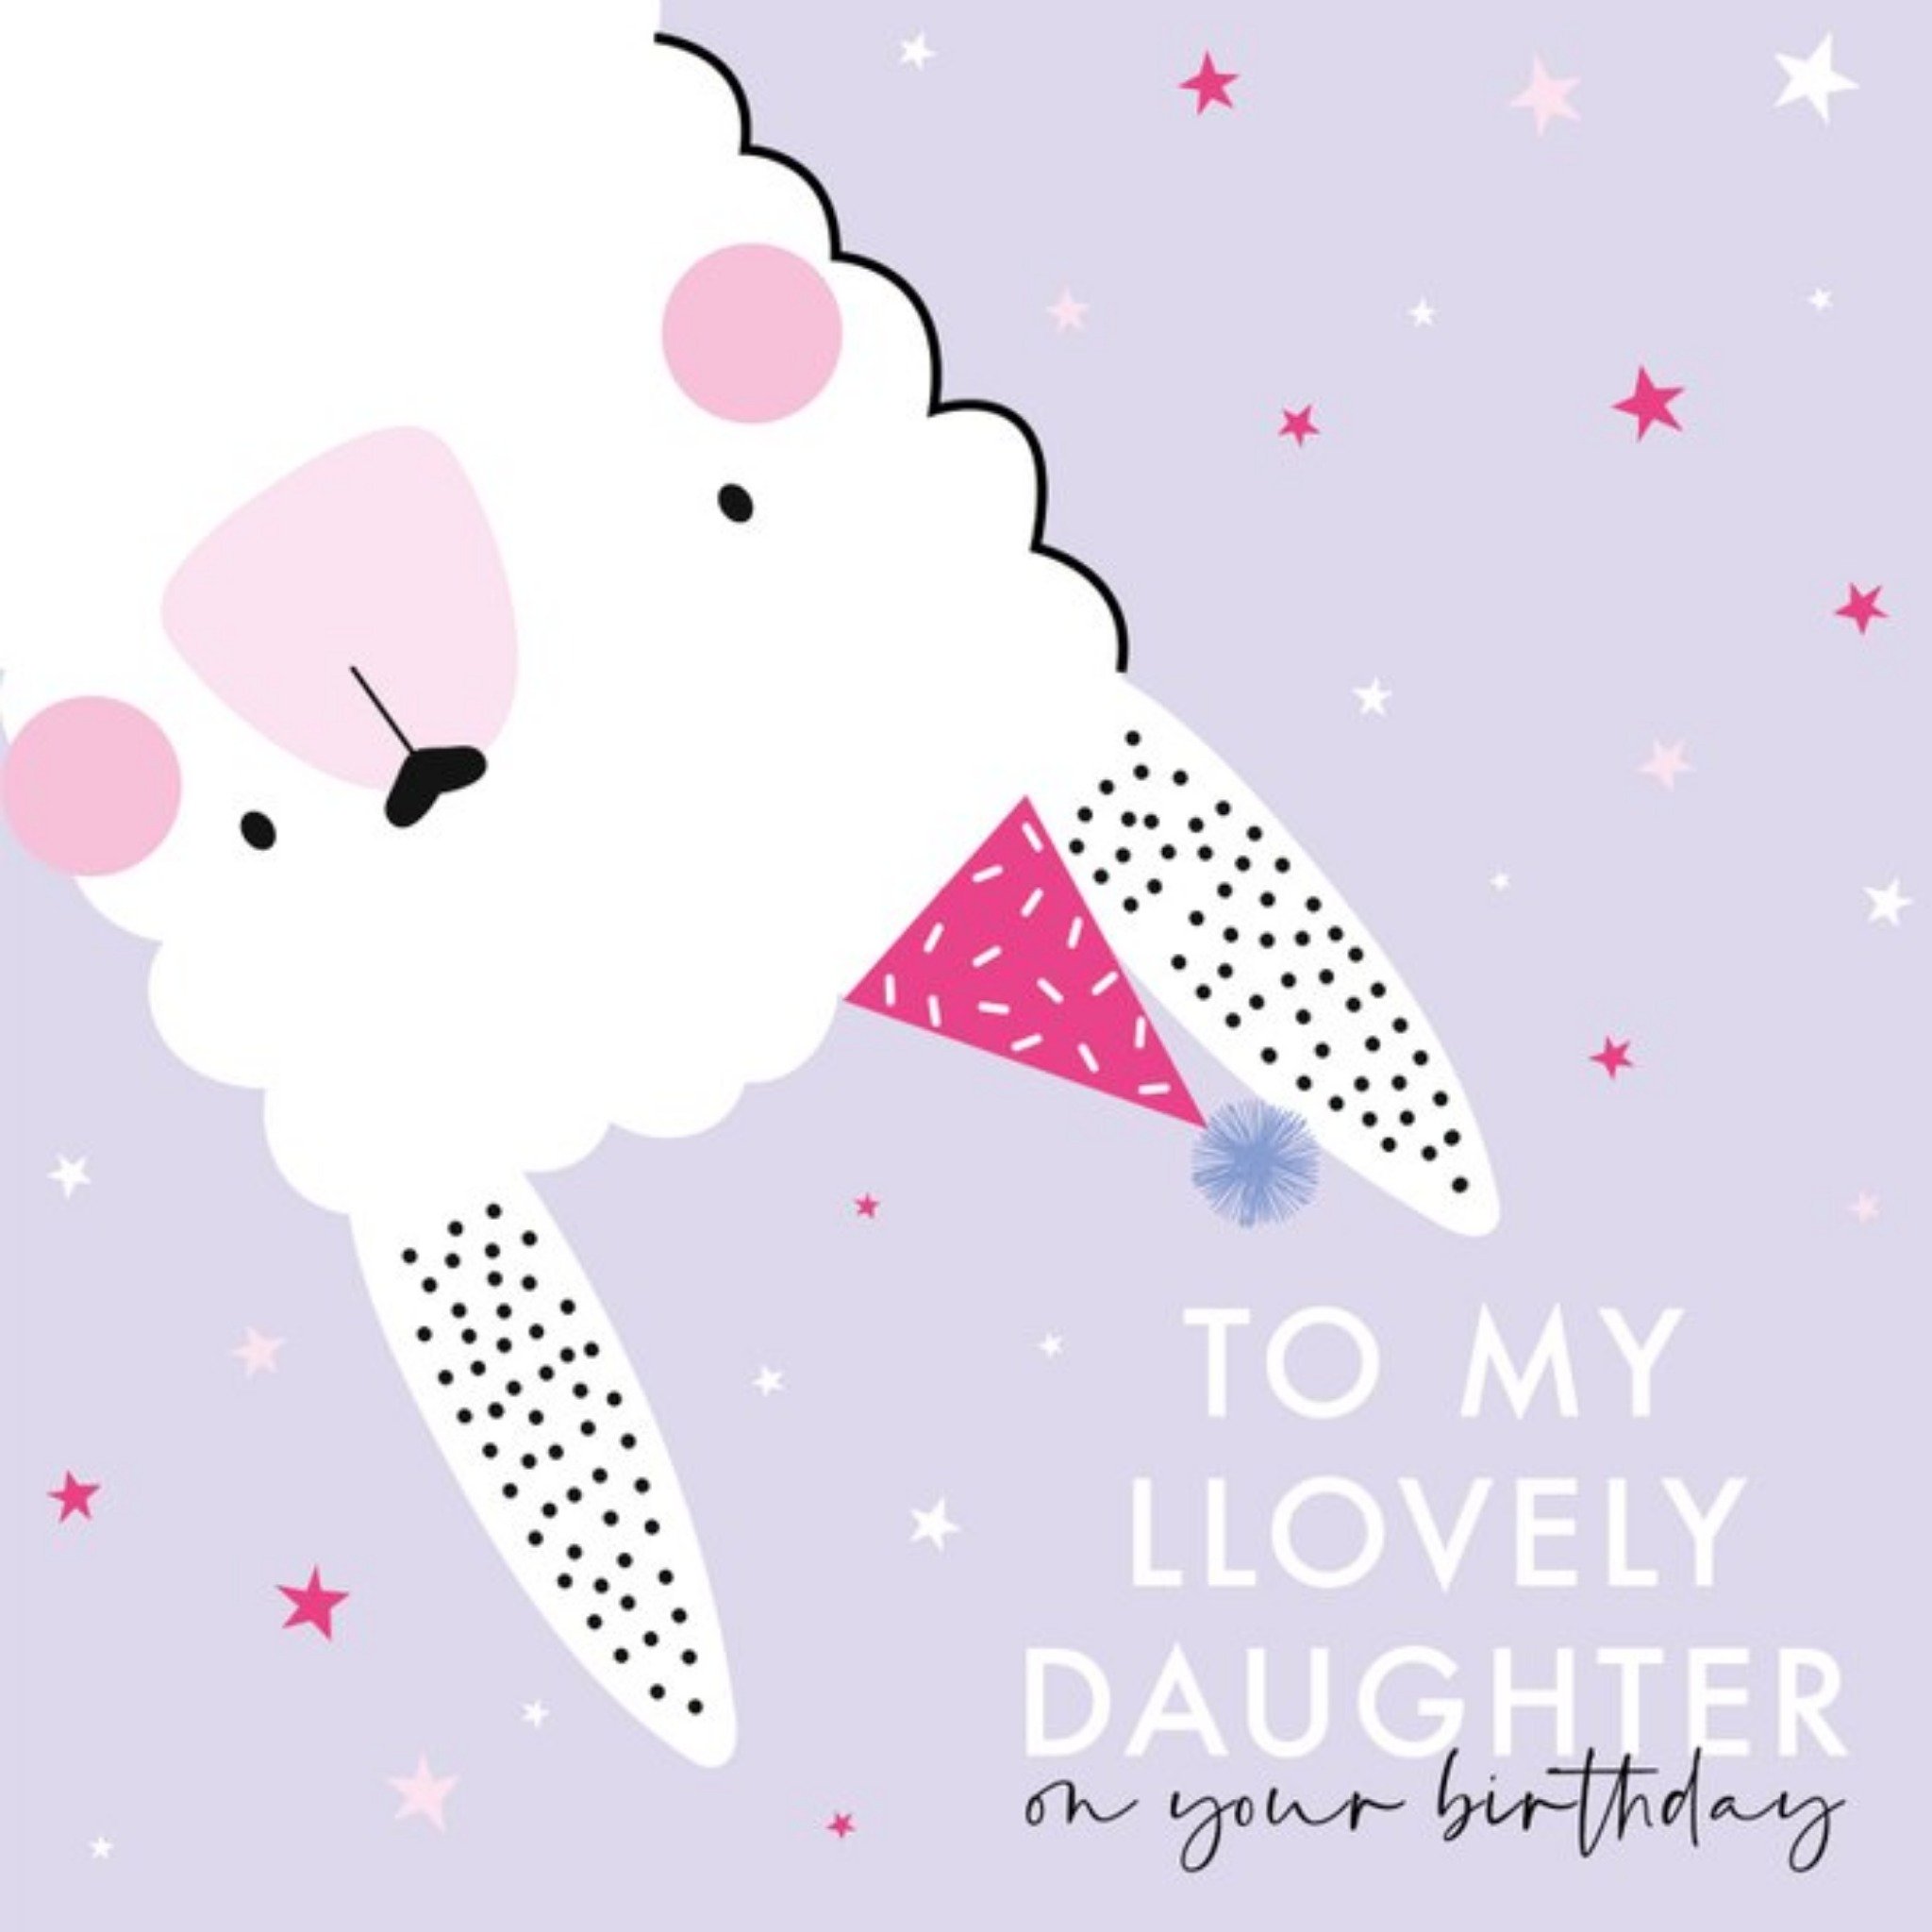 Moonpig Cute Daughter Lovely Llama On Your Birthday Card, Square